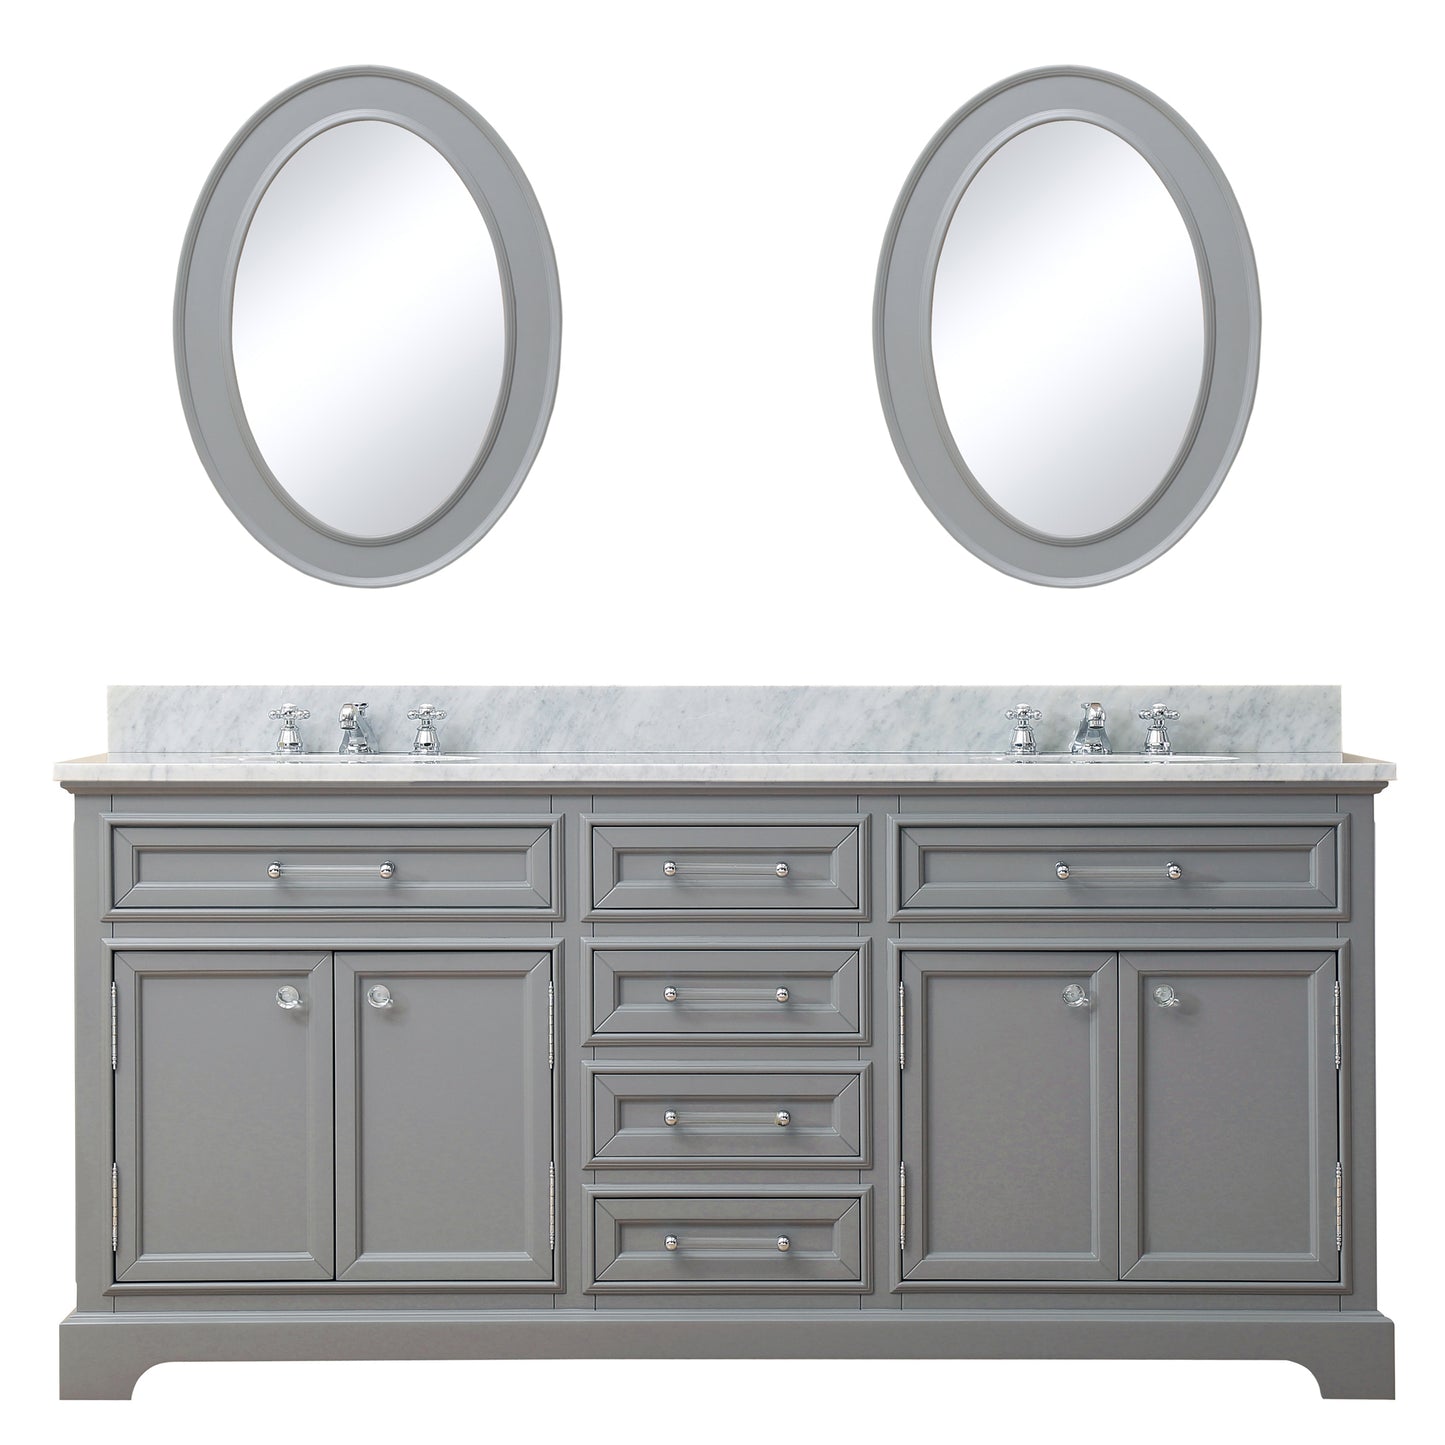 Water Creation Derby 72 Inch Double Sink Bathroom Vanity With Matching Framed Mirrors And Faucets - Luxe Bathroom Vanities